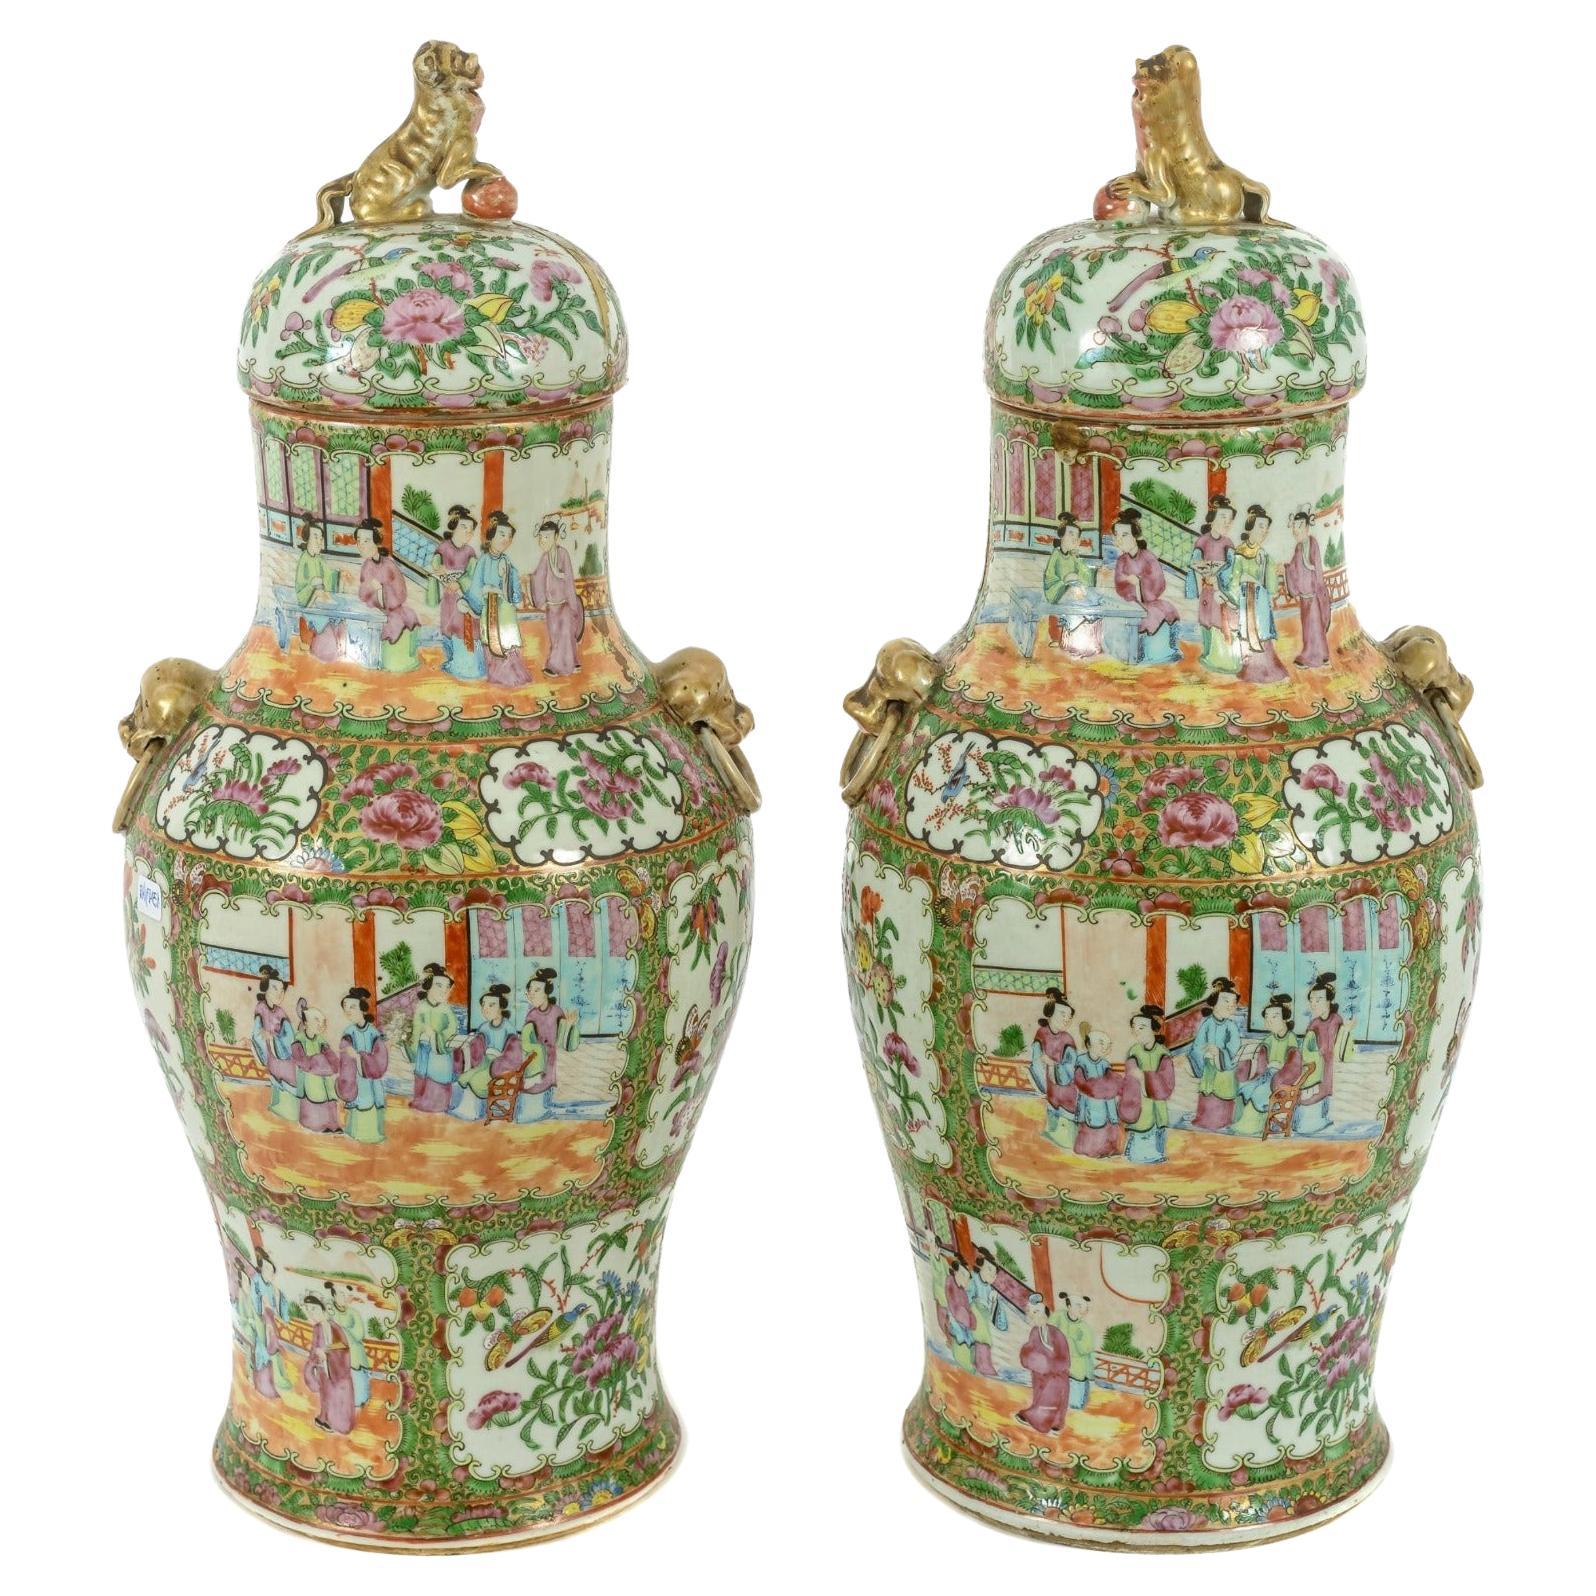 Pair of Porcelain Jars "Rose Family" Cantón Qing Dynasty China 19th Century